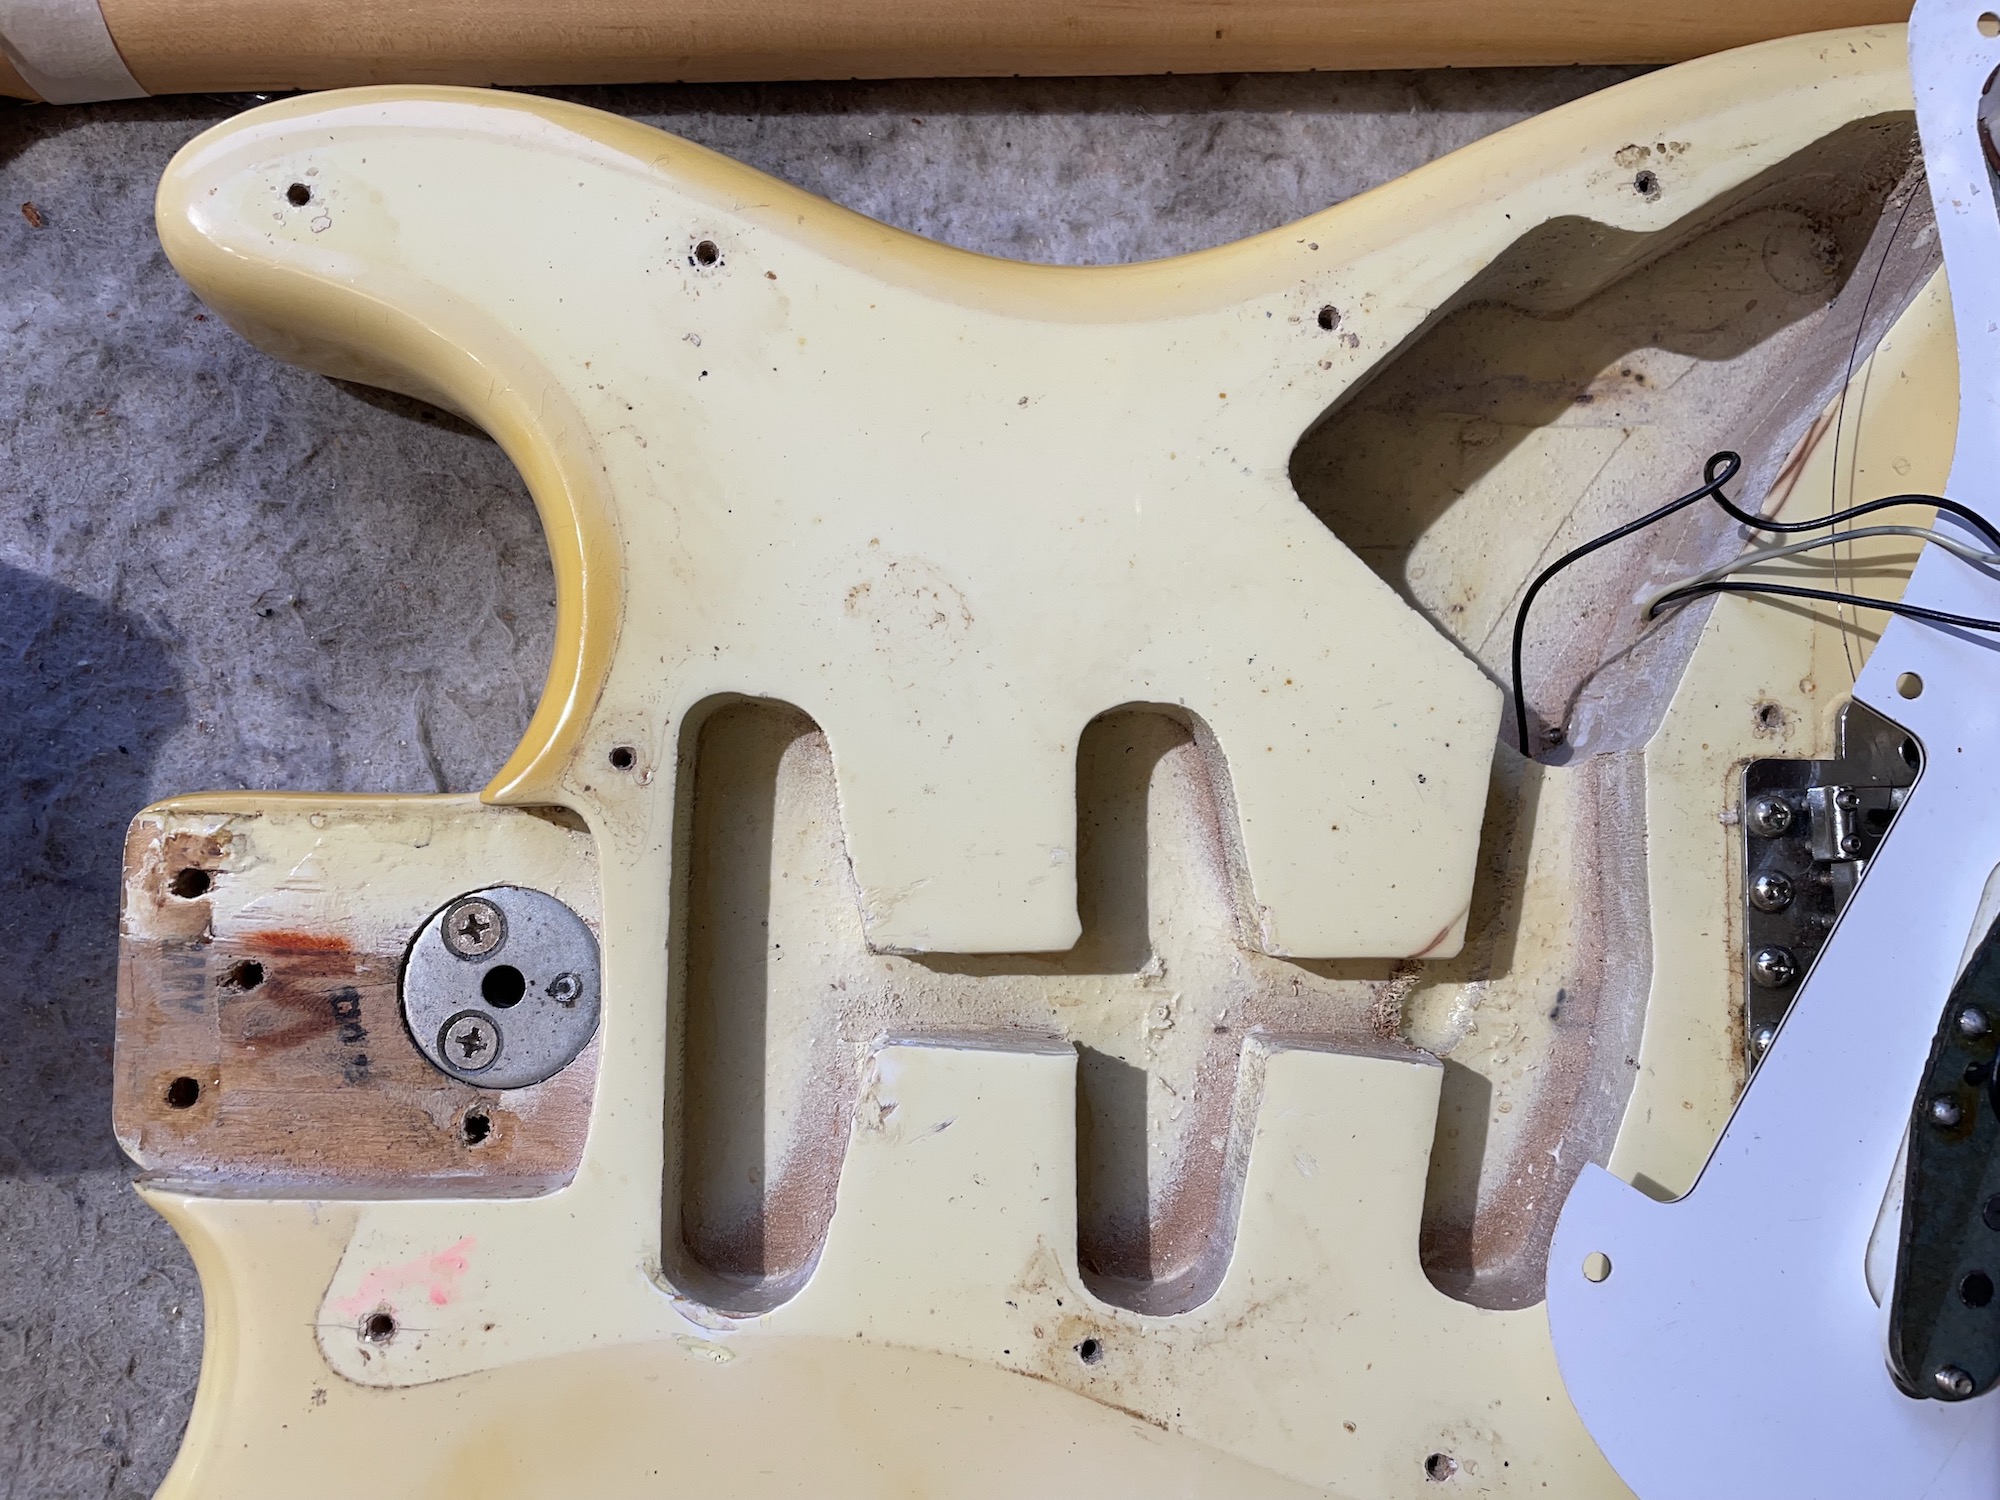 Fender Stratocaster 1972 Olympic White (on commission)